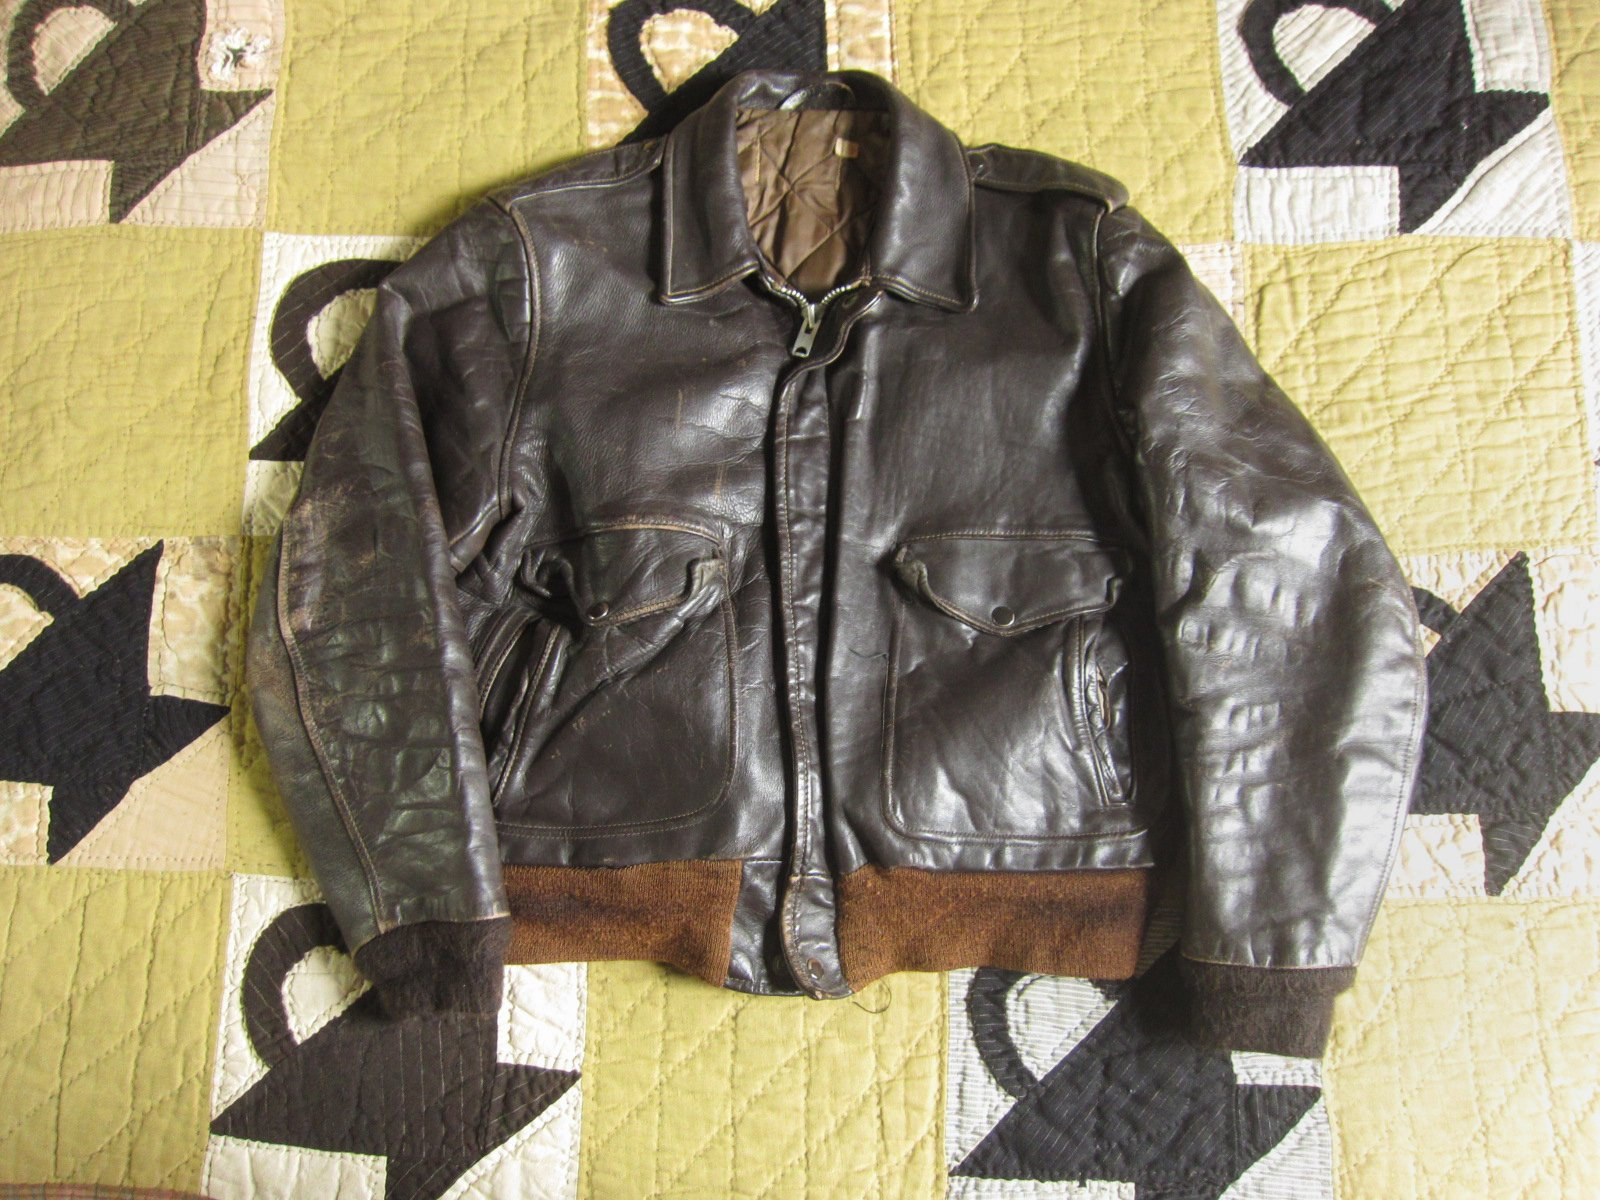 Help dating a vintage A-2 style Schott Bros(?) jacket | The Fedora Lounge